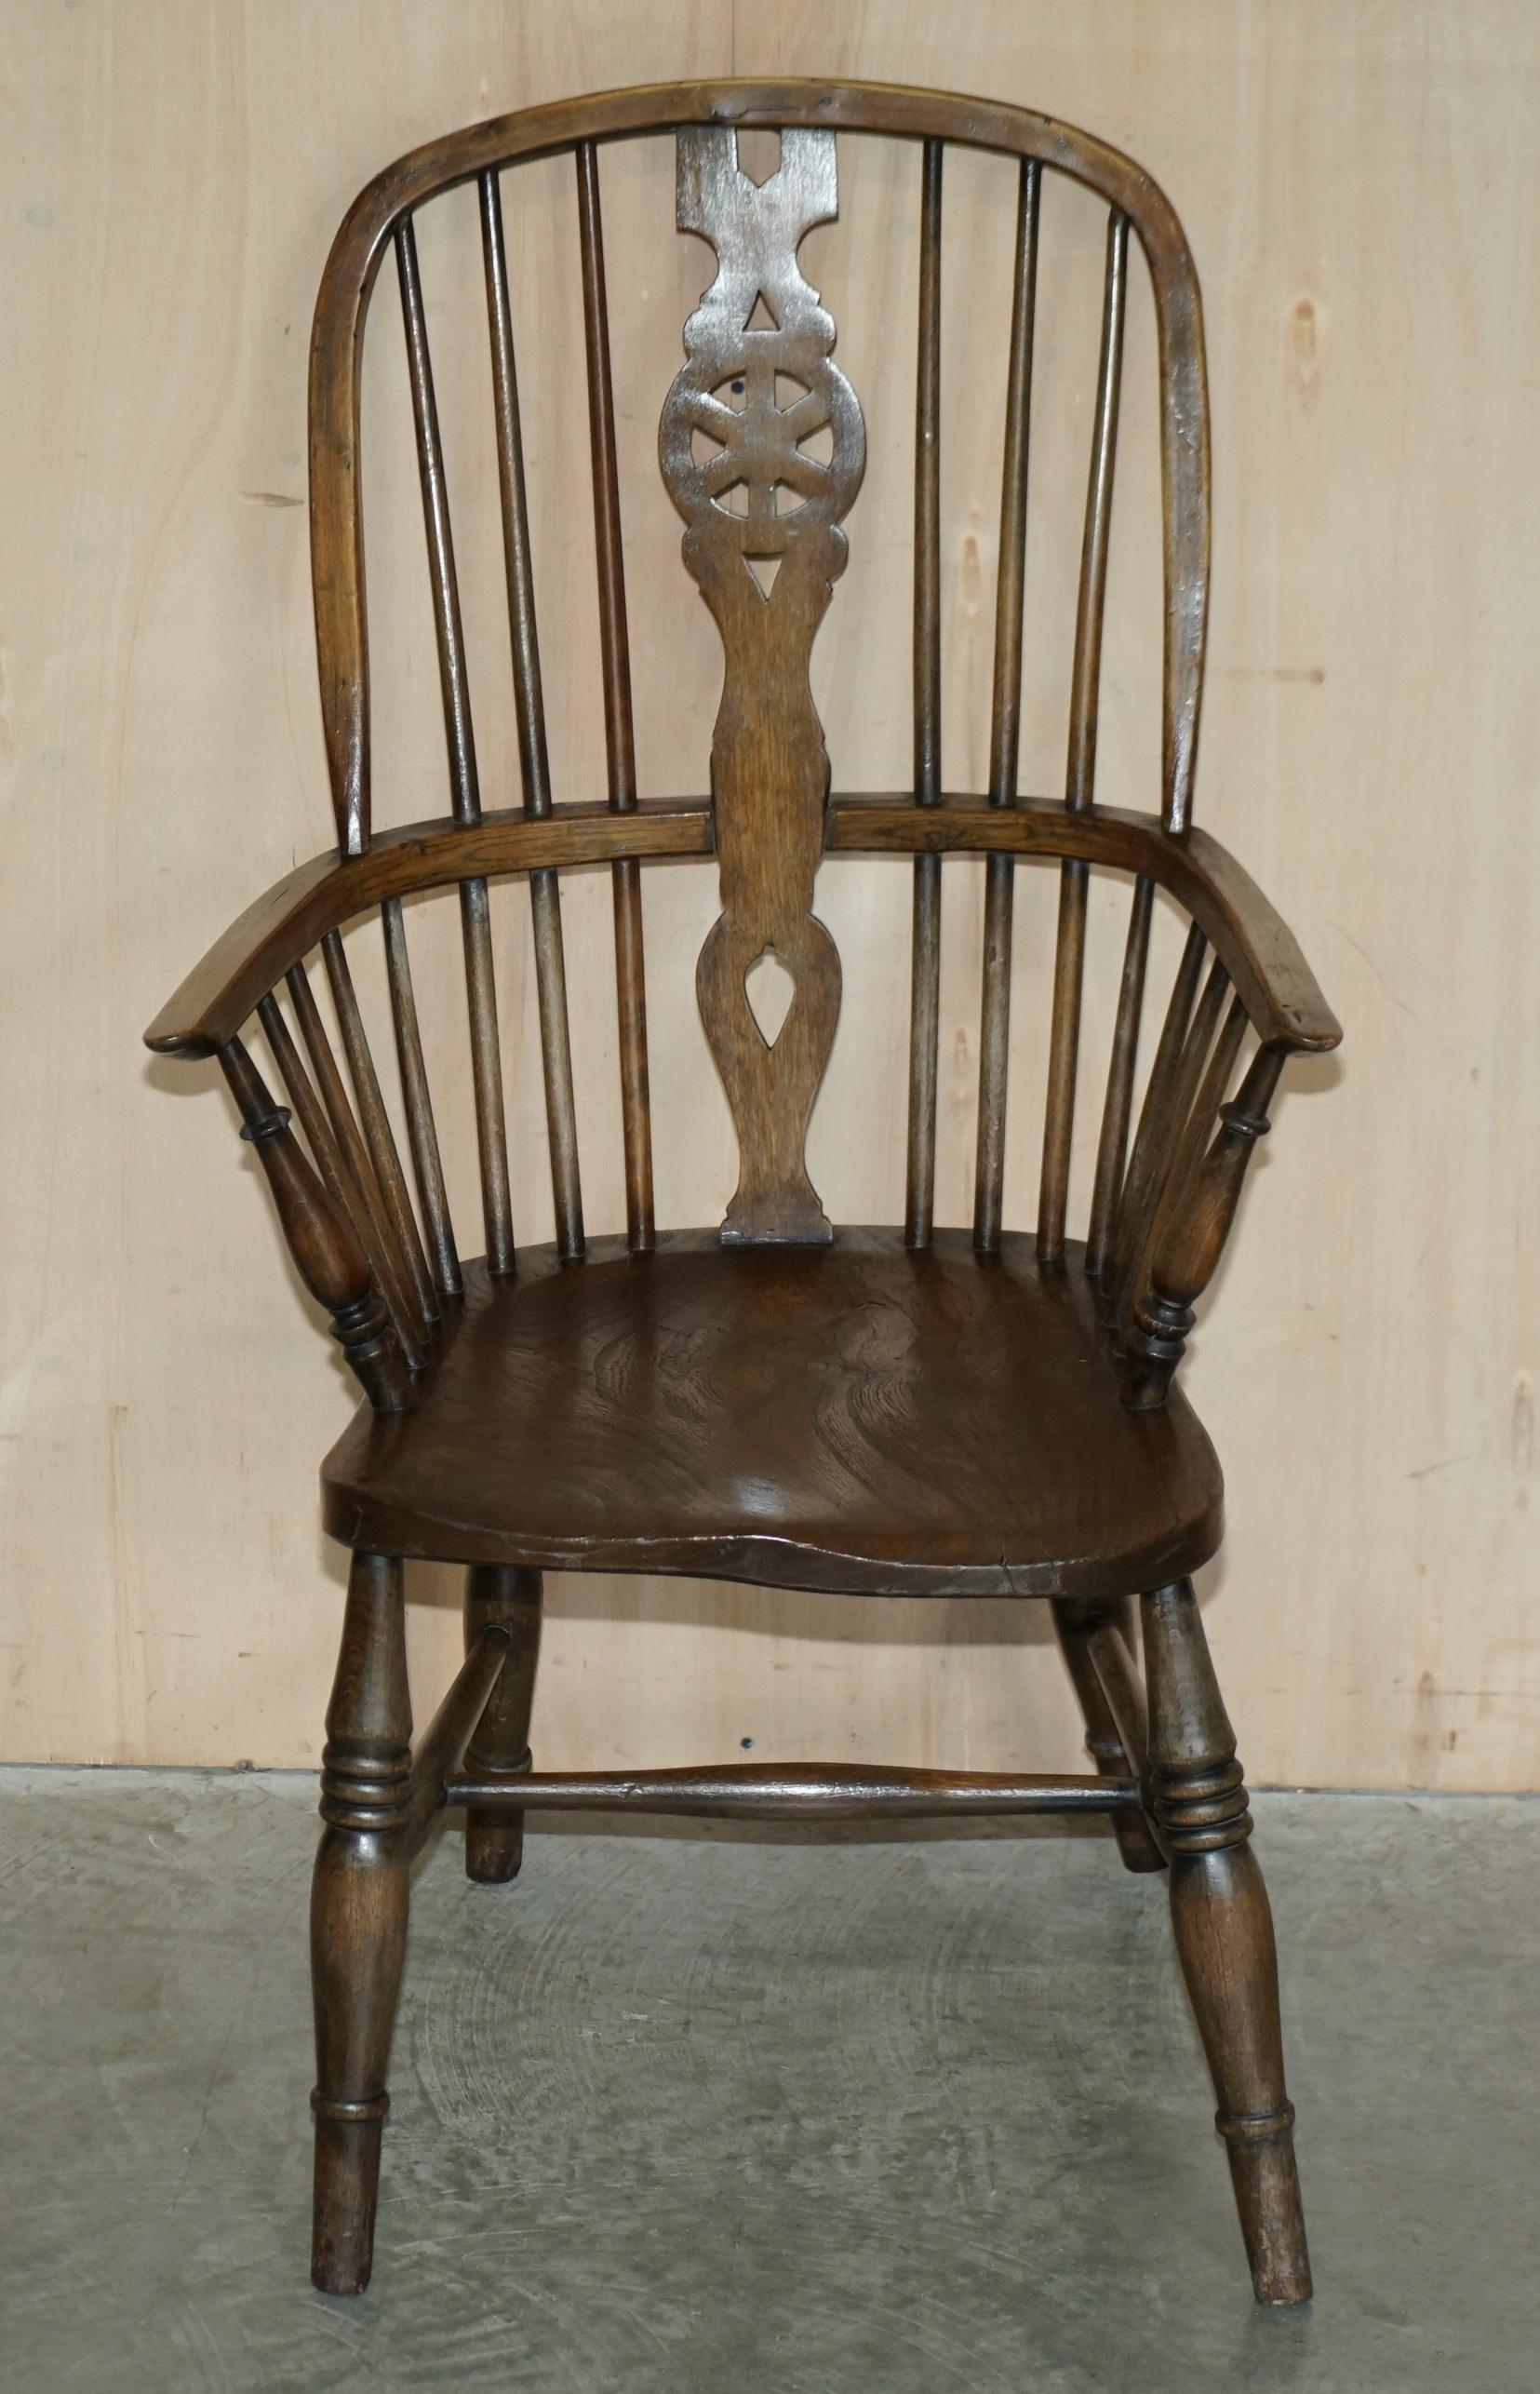 We are delighted to offer for sale this stunning early 19th century English classic antique Elm hoop back west country Windsor armchair

A highly coveted, well made and decorative armchair, in the traditional Elm, this is an early hoop back